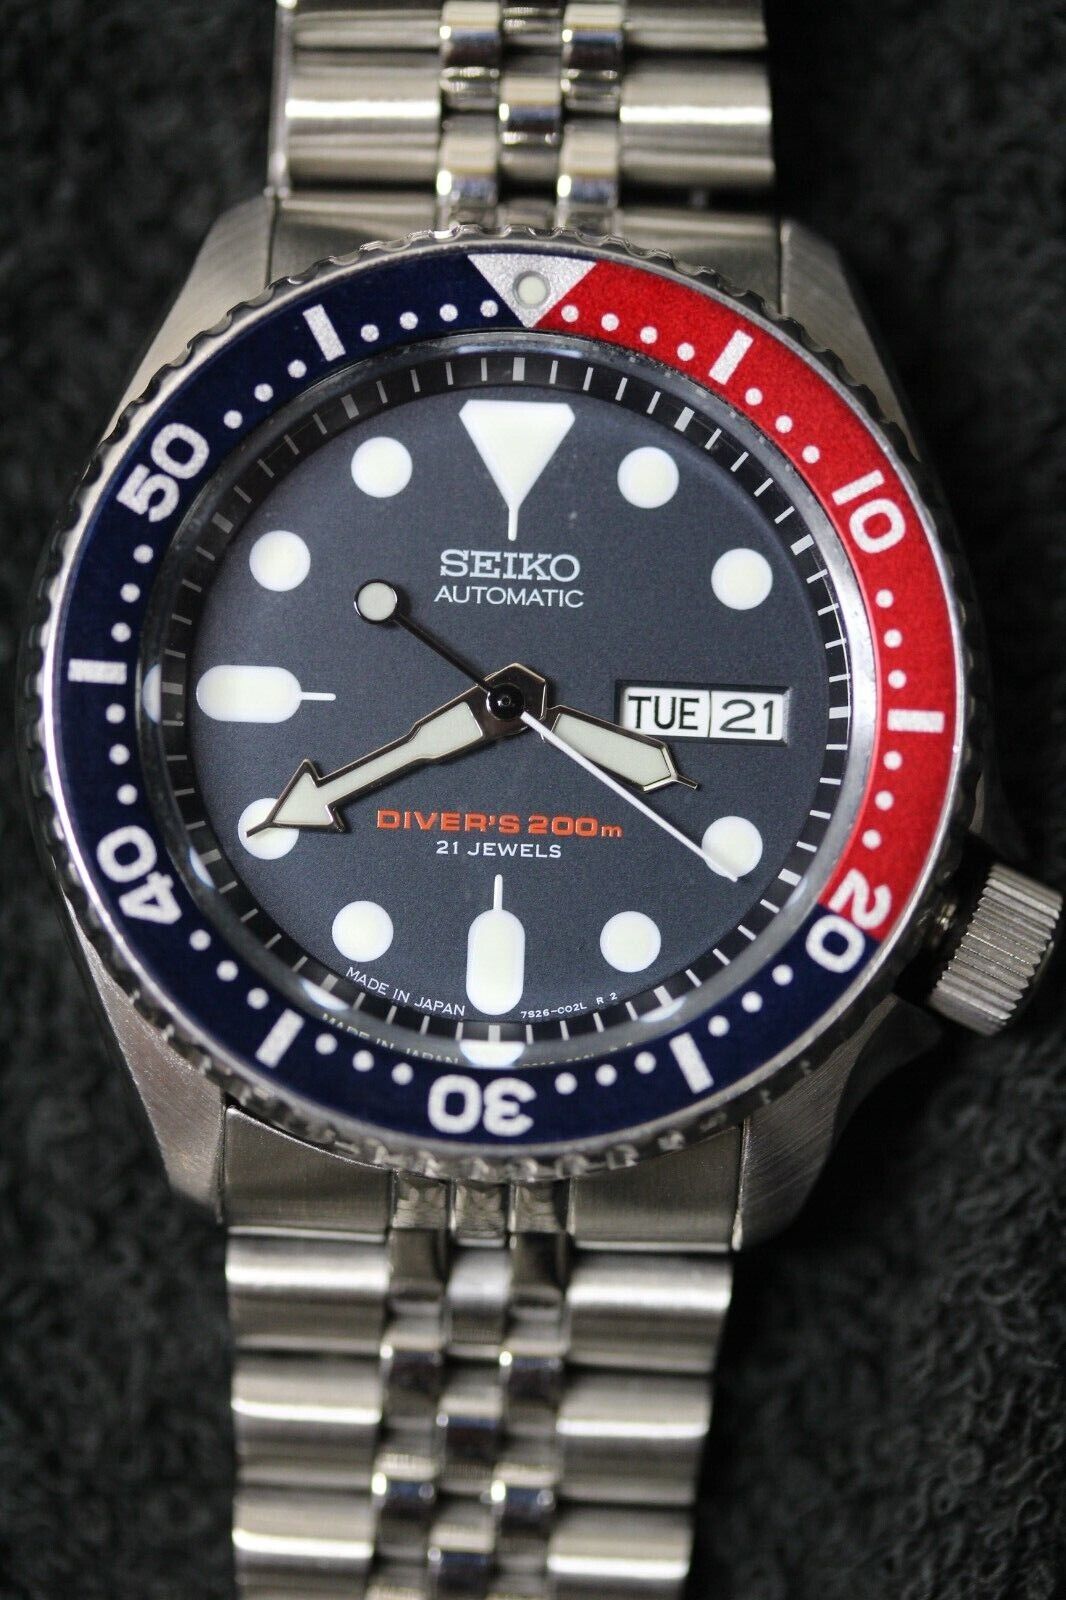 Seiko Blue Men's Watch-SKX009J-Jubilee and Rubber Bands, Tags and Warranty Card